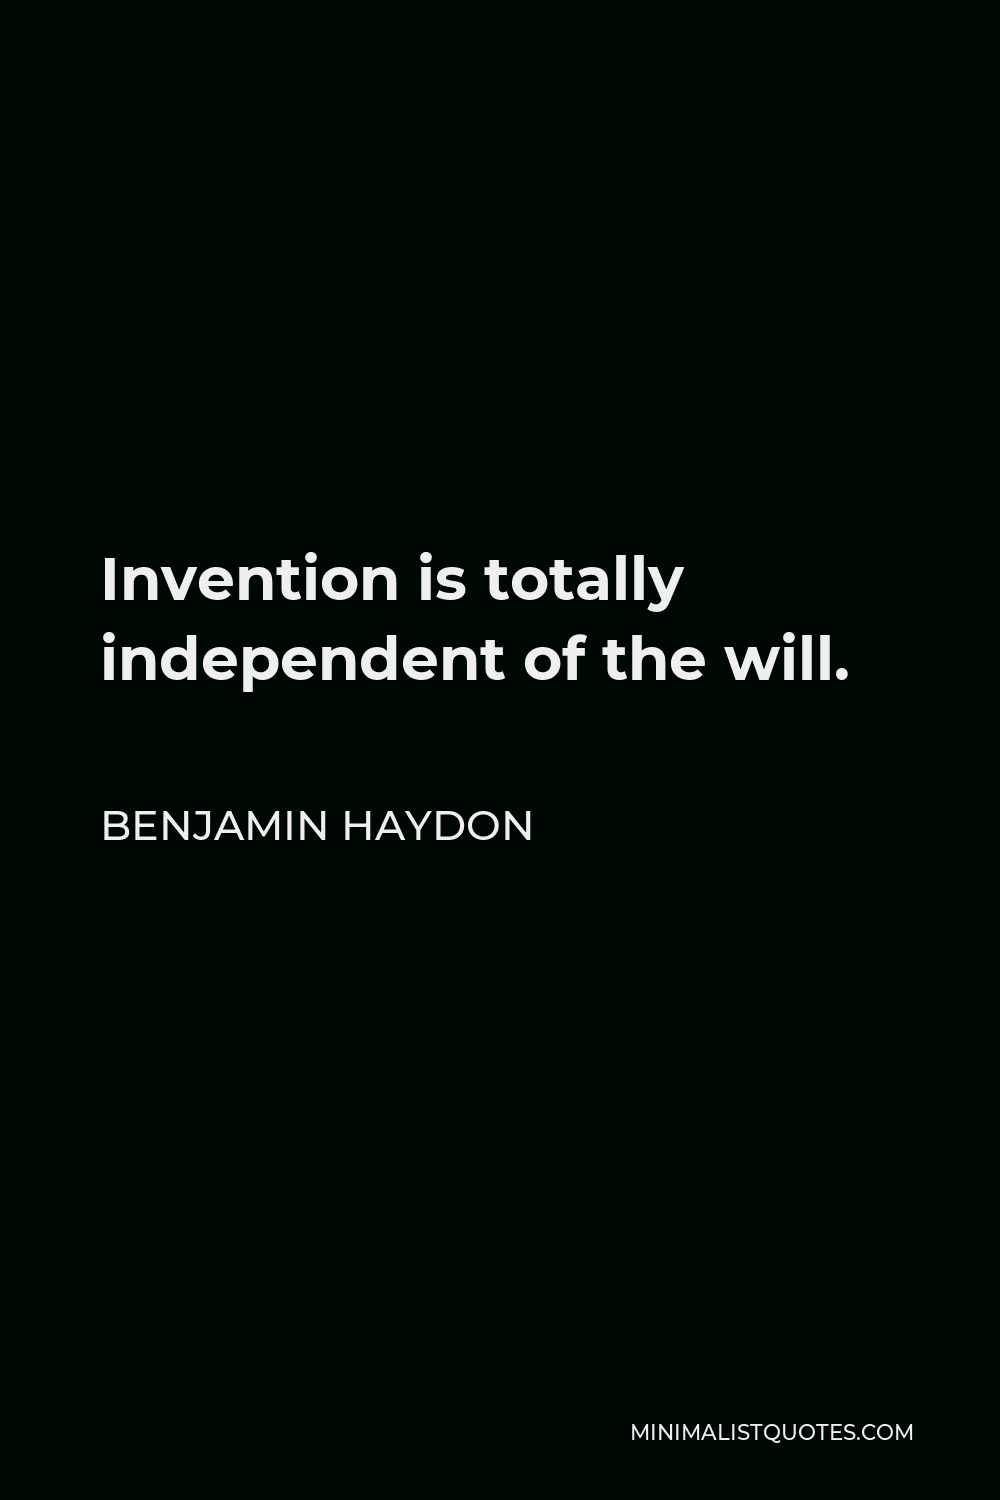 Benjamin Haydon Quote - Invention is totally independent of the will.